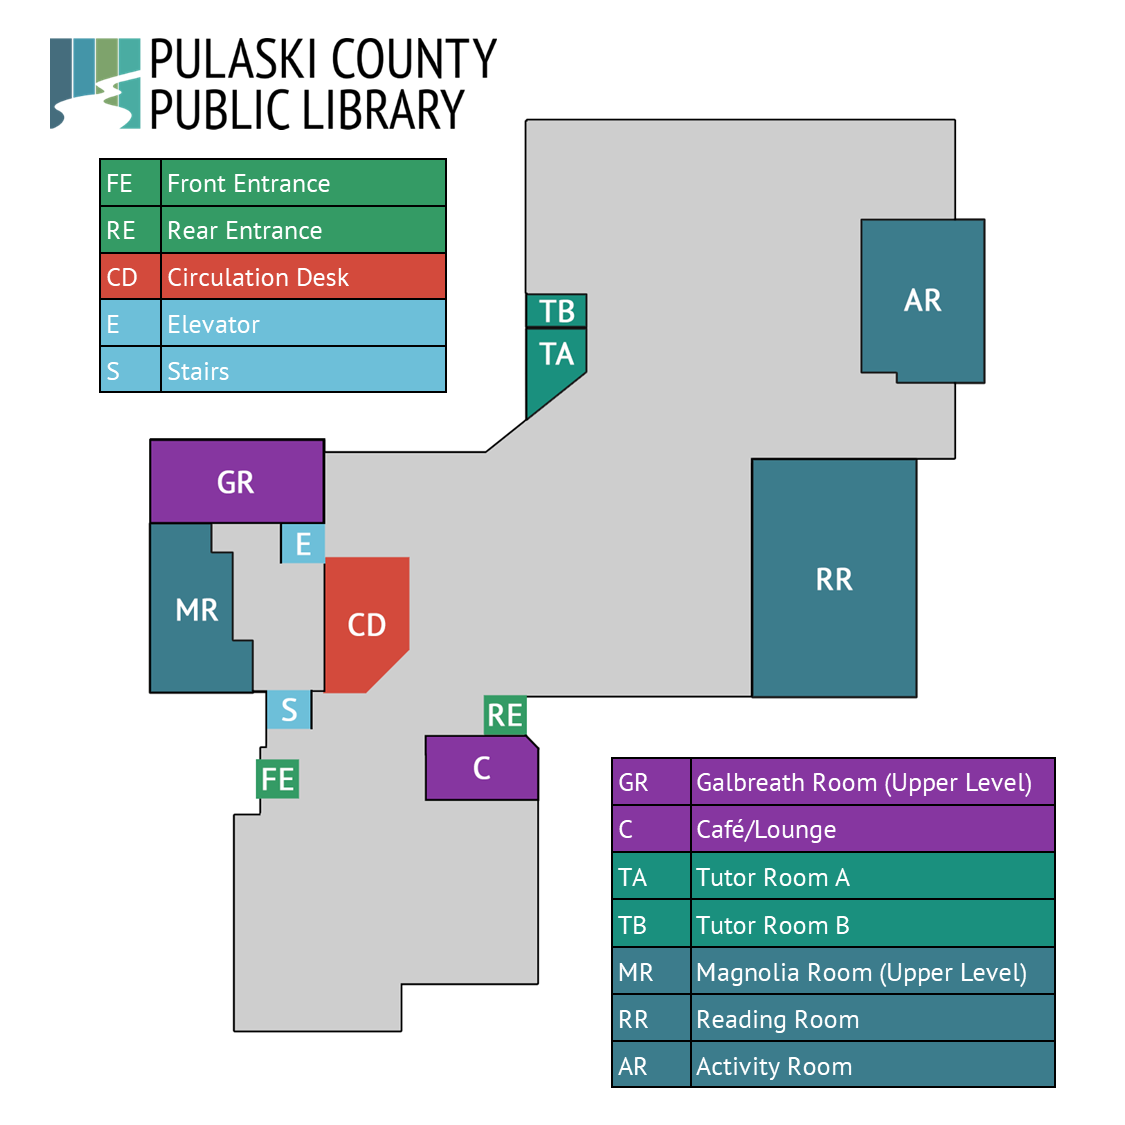 Meeting Rooms and Public Spaces at the Pulaski County Public Library